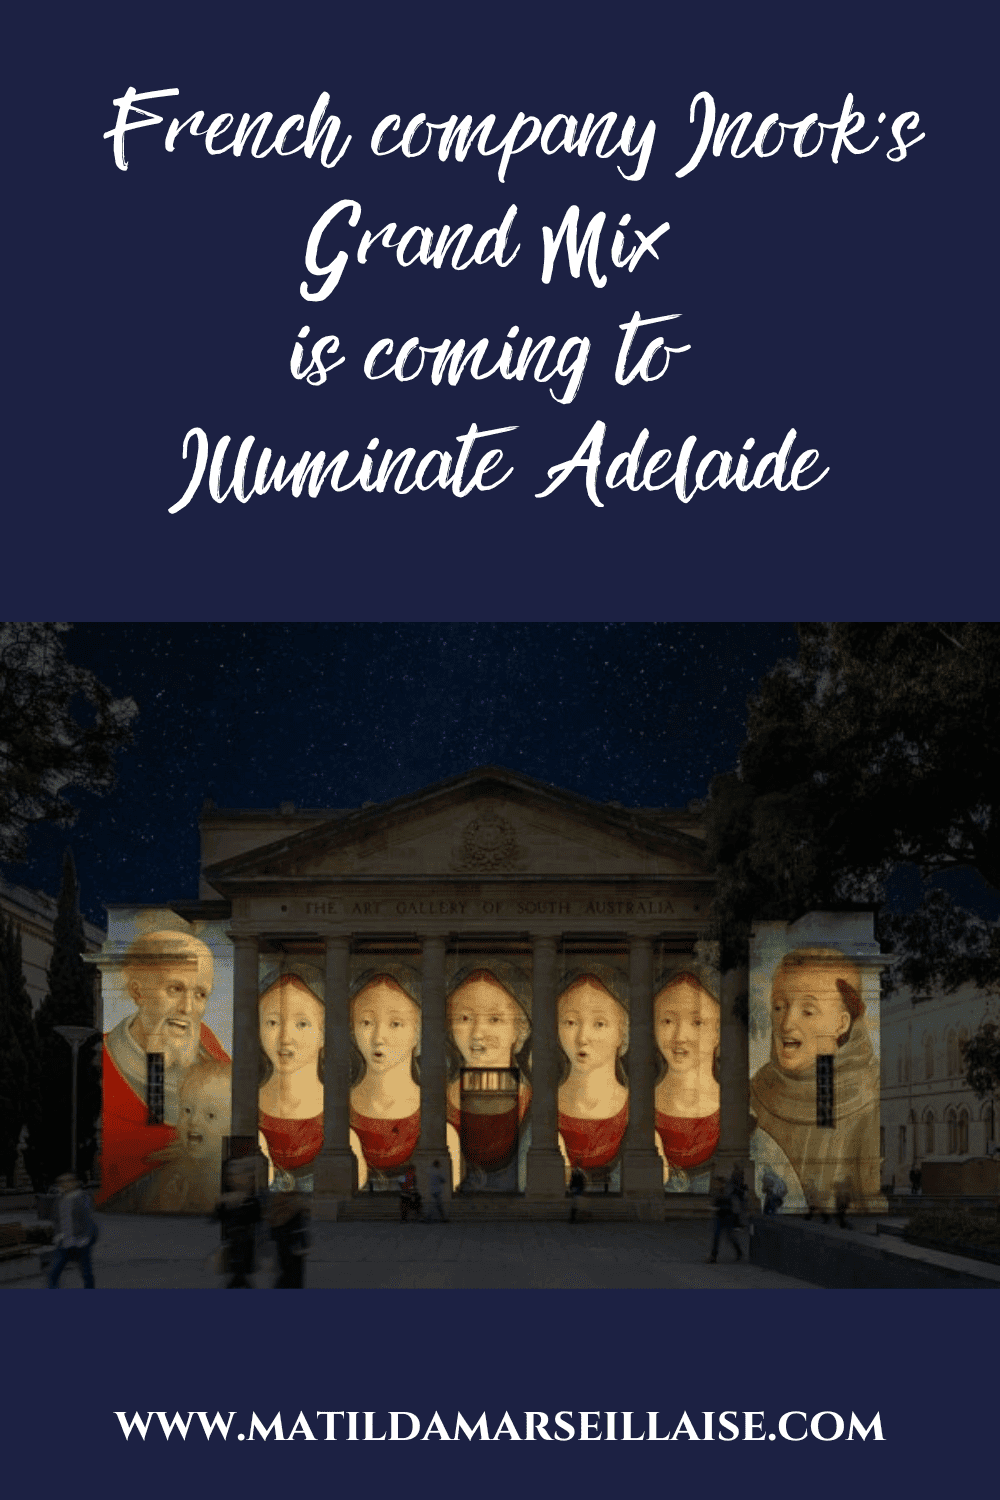 Want to see Renaissance paintings come to life? With Grand Mix at Illuminate Adelaide you can!